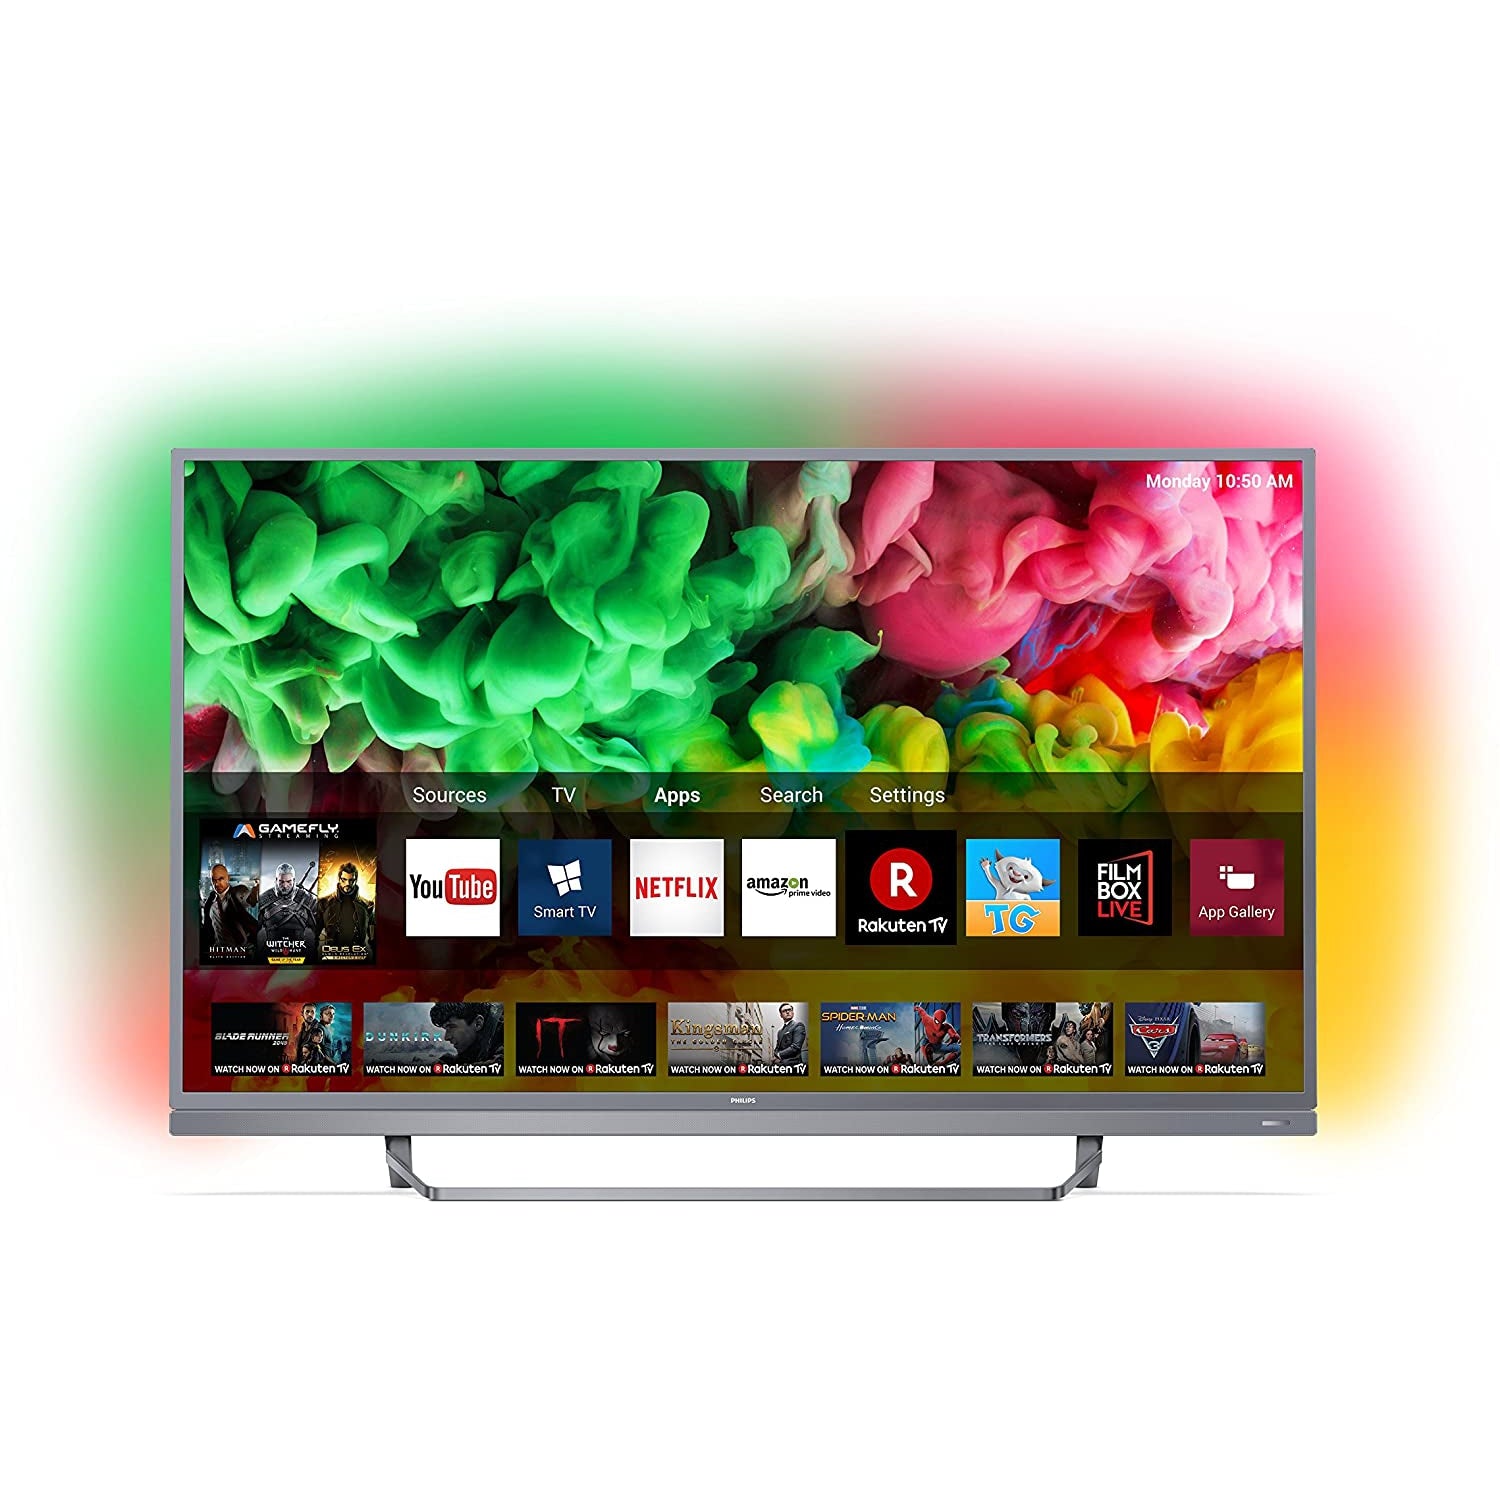 Refurbished Philips 55PUS6803/12 55-Inch 4K Ultra HD Smart TV with HDR Plus, Freeview Play and 3-sided Ambilight - Dark Silver (2018 Model)